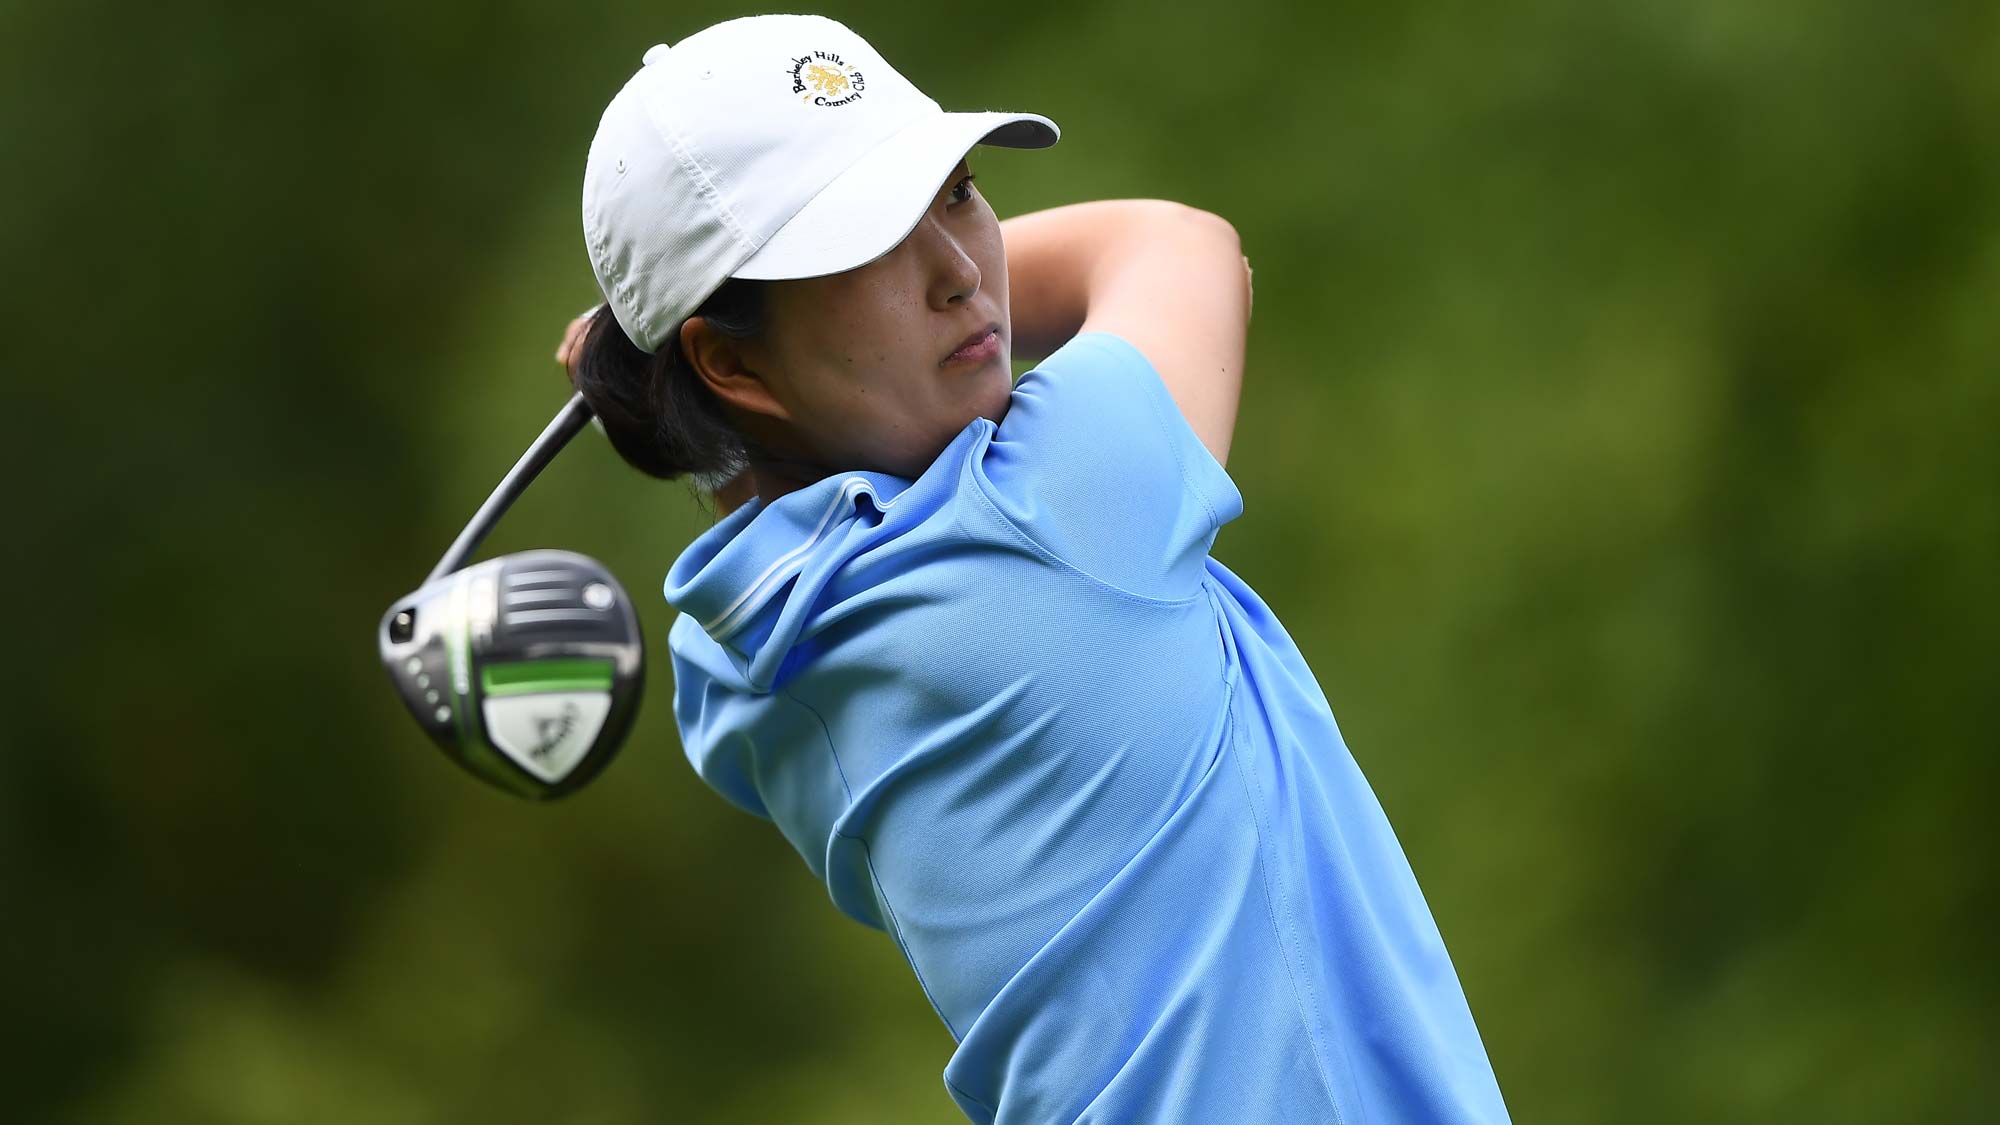 Min Seo Kwak of Korea tees off during the first round of The ISPS HANDA World Invitational